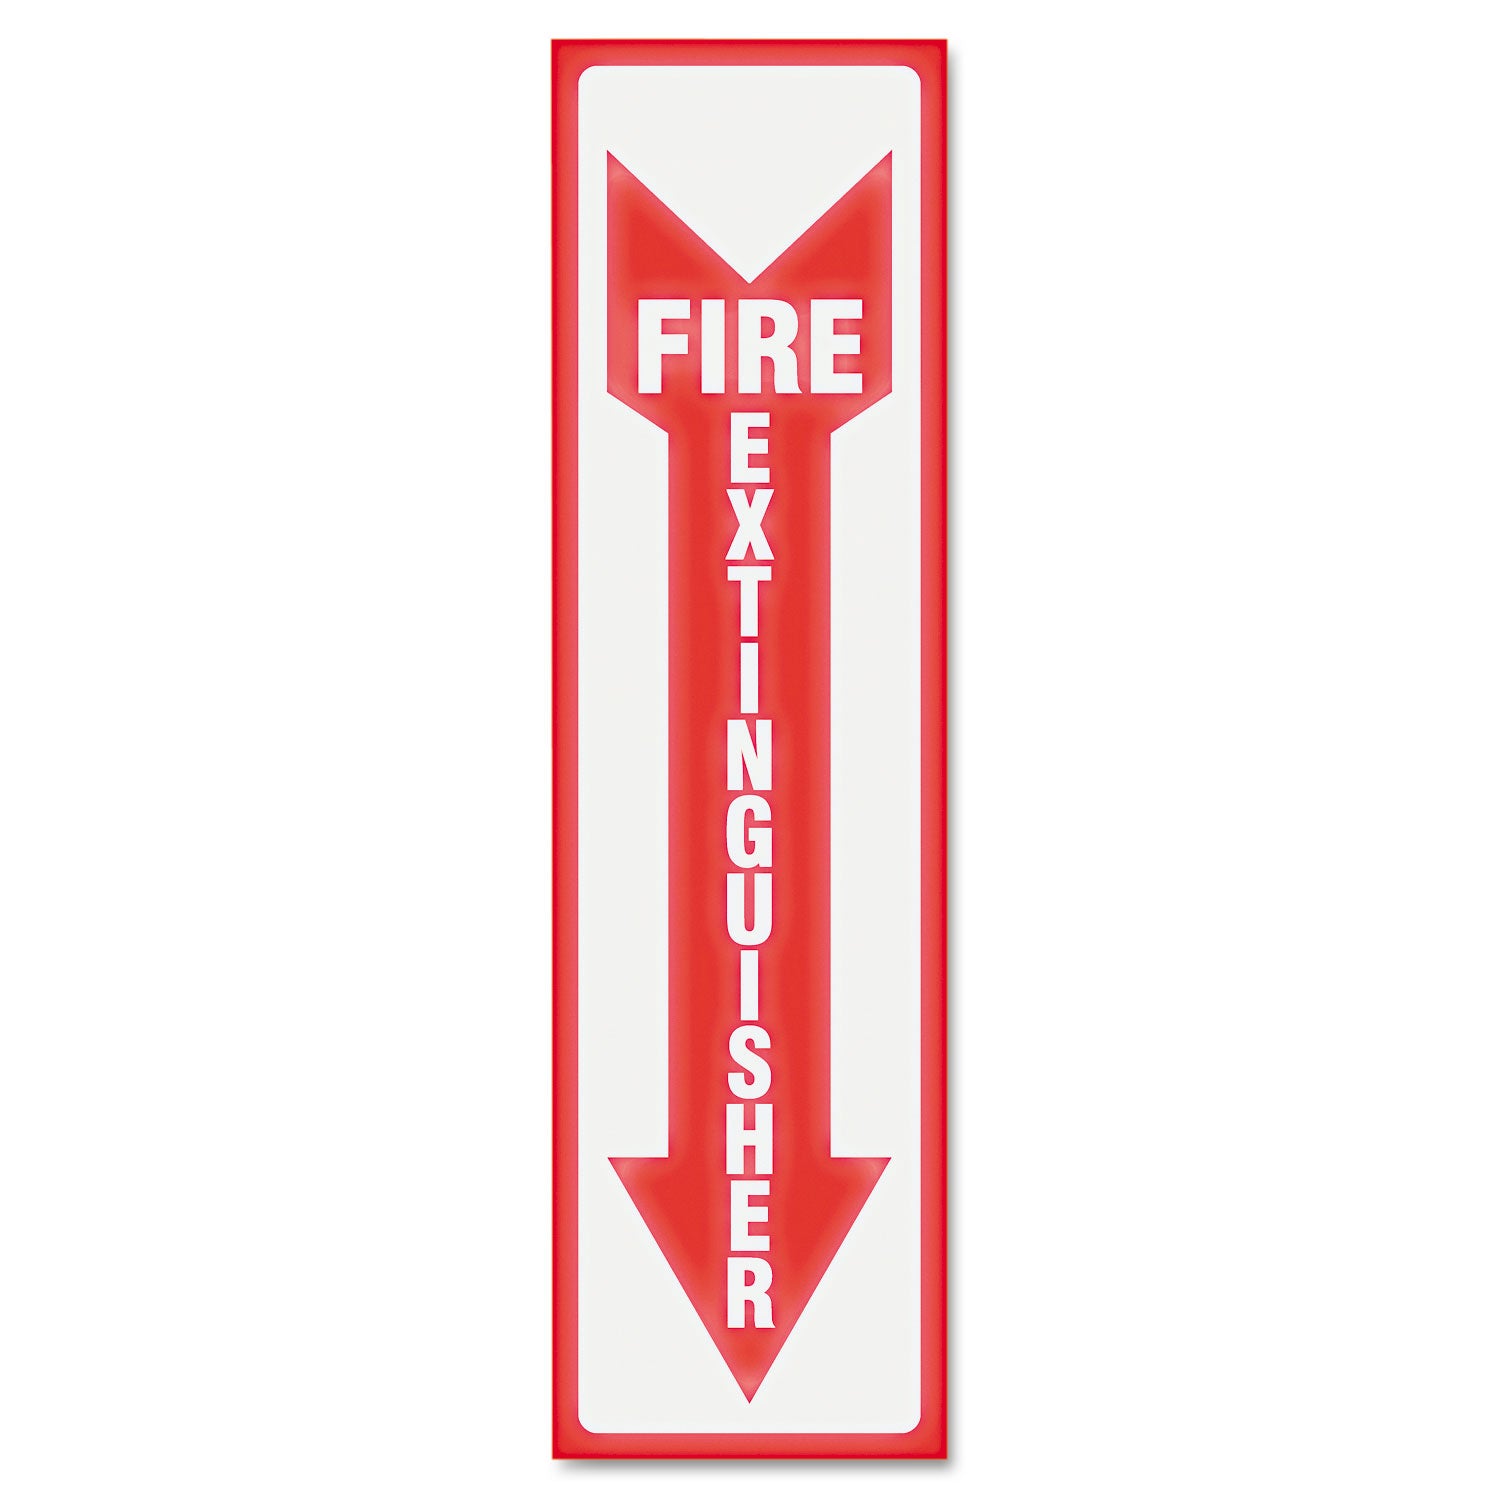 Glow In The Dark Sign, 4 x 13, Red Glow, Fire Extinguisher - 